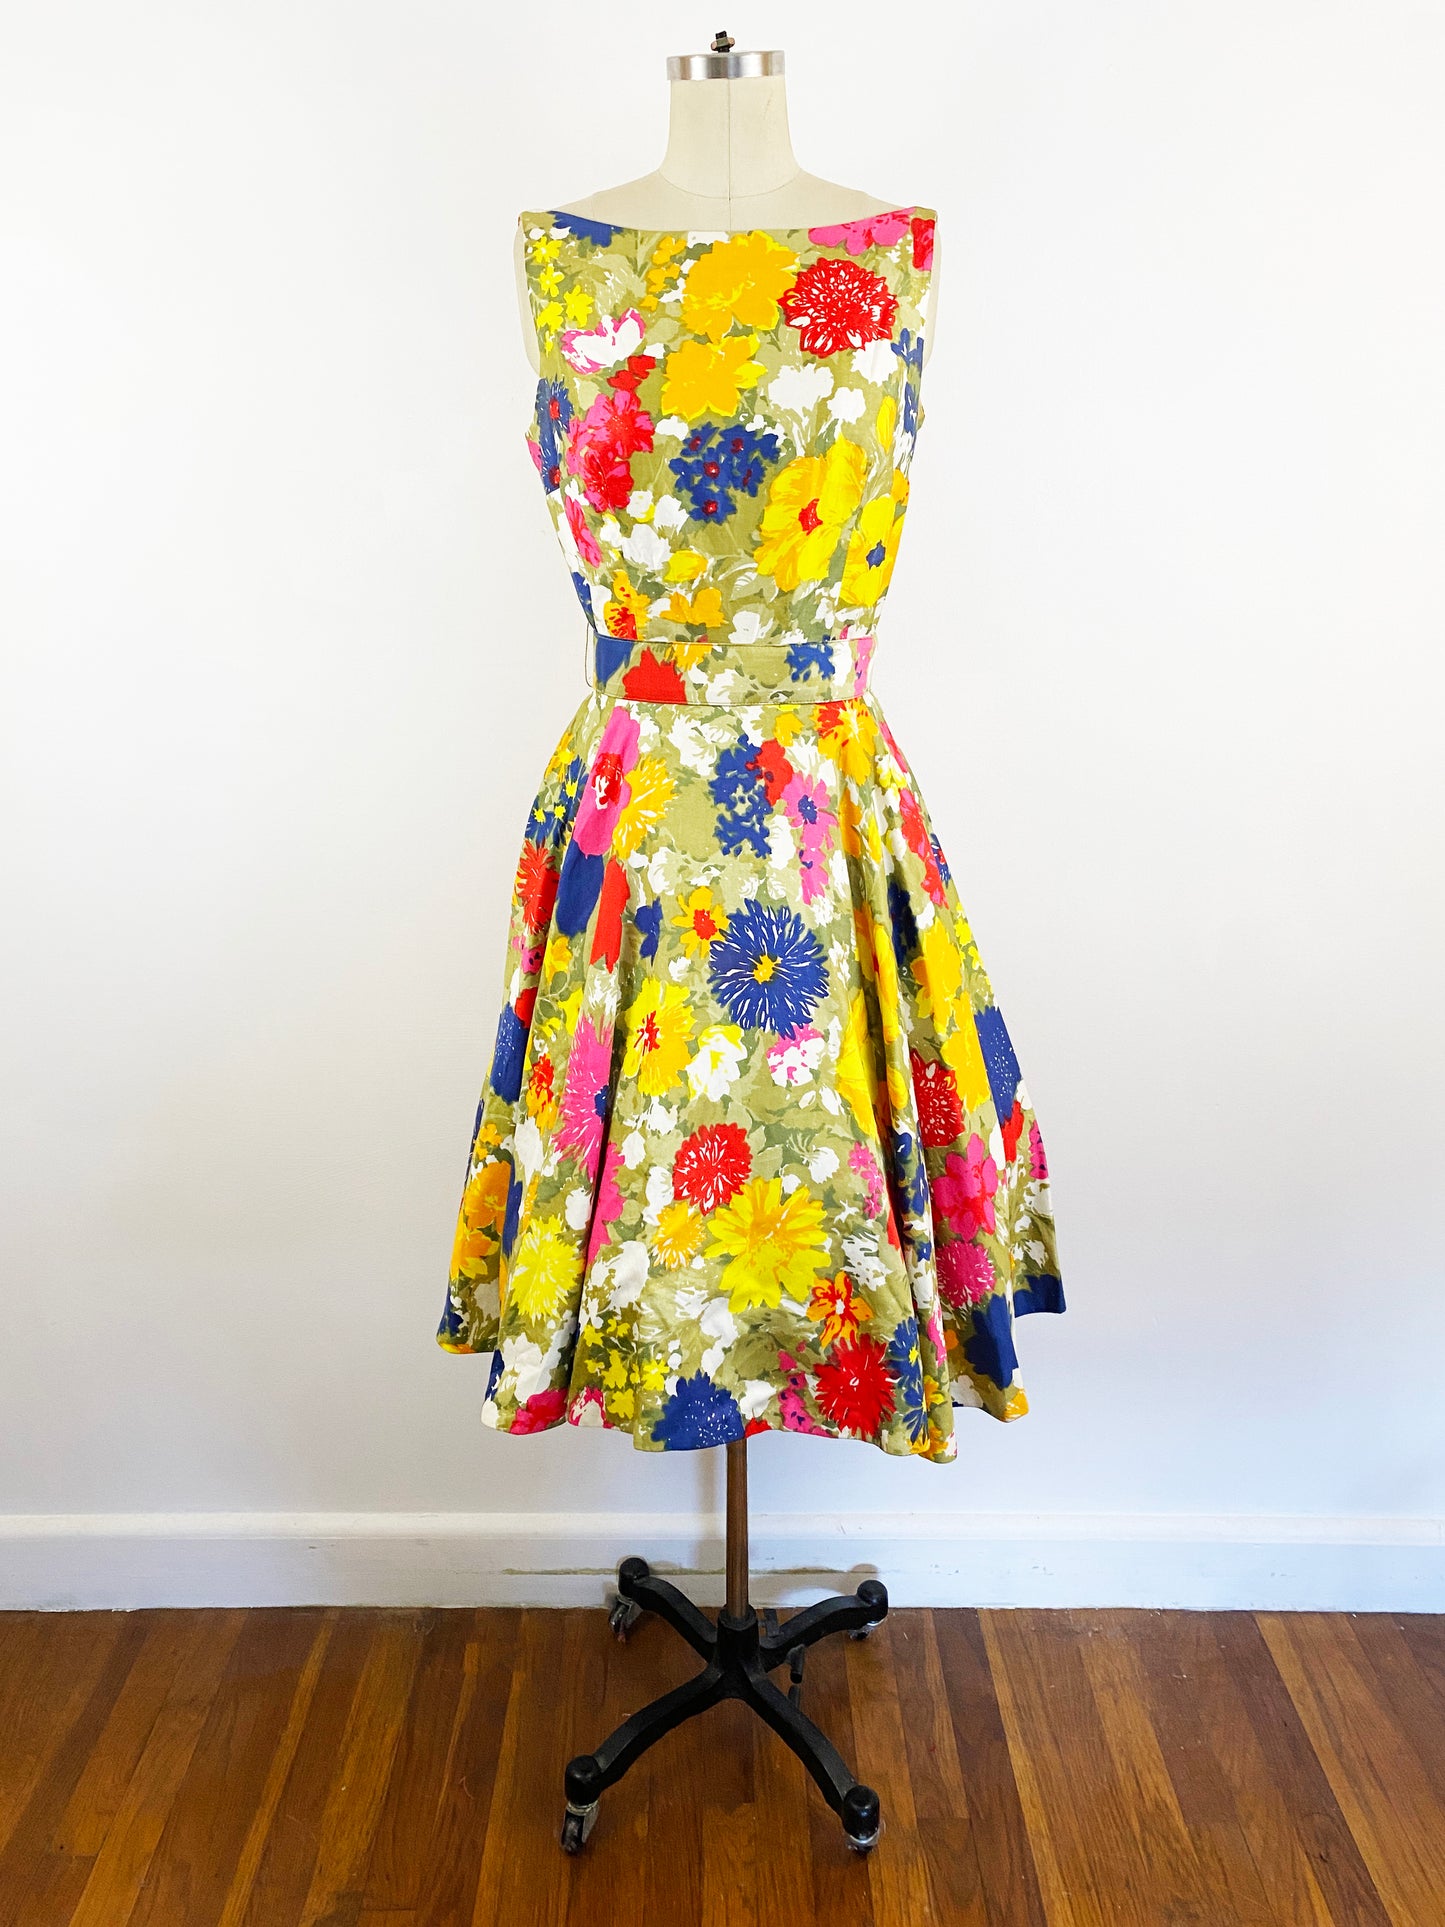 1960s Jay Herbert Rainbow Floral Print Sundress Low Scoop Back Colorful Cotton Day Dress Fit and Flare / Small